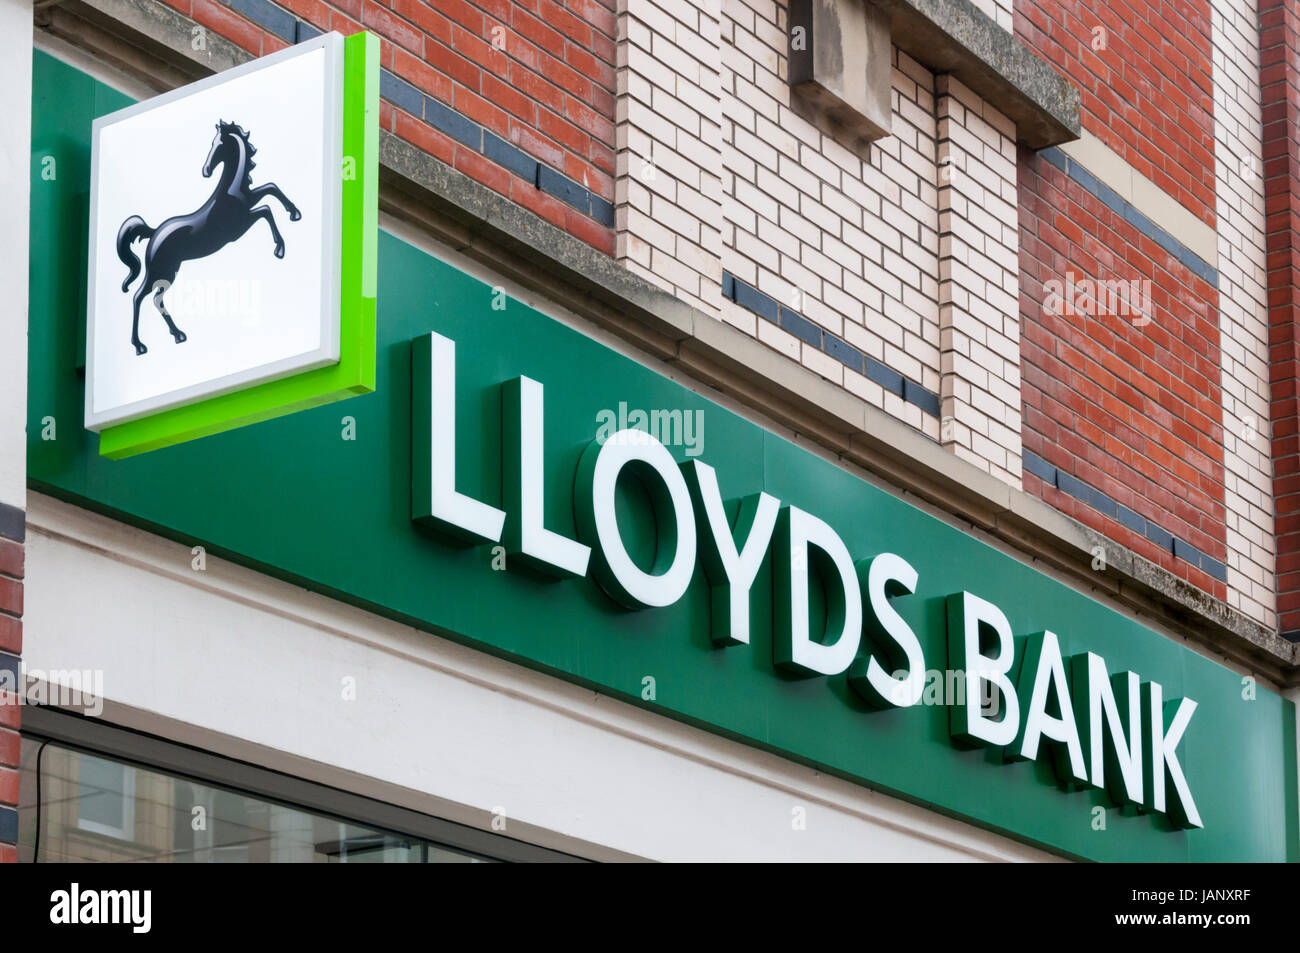 Lloyds Bank Black Horse sign and name over a branch of the bank in UK. Stock Photo